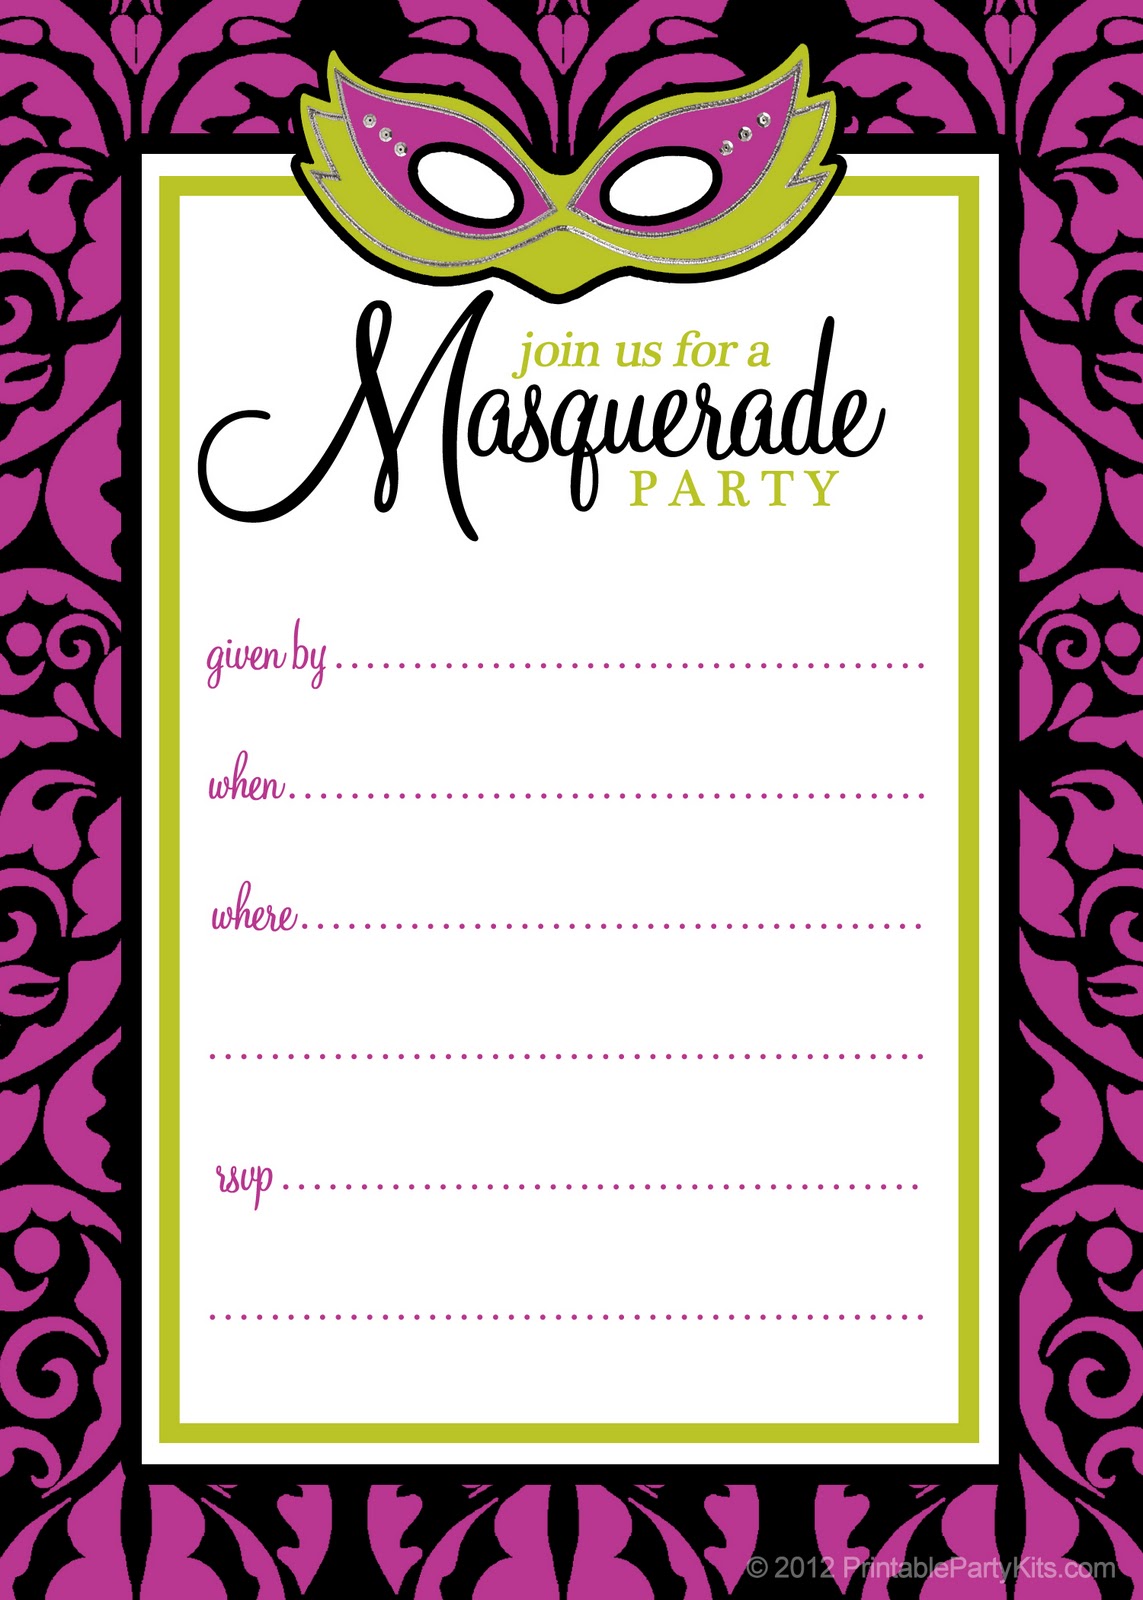 Click on the free masquerade invitation template to see it at its full 